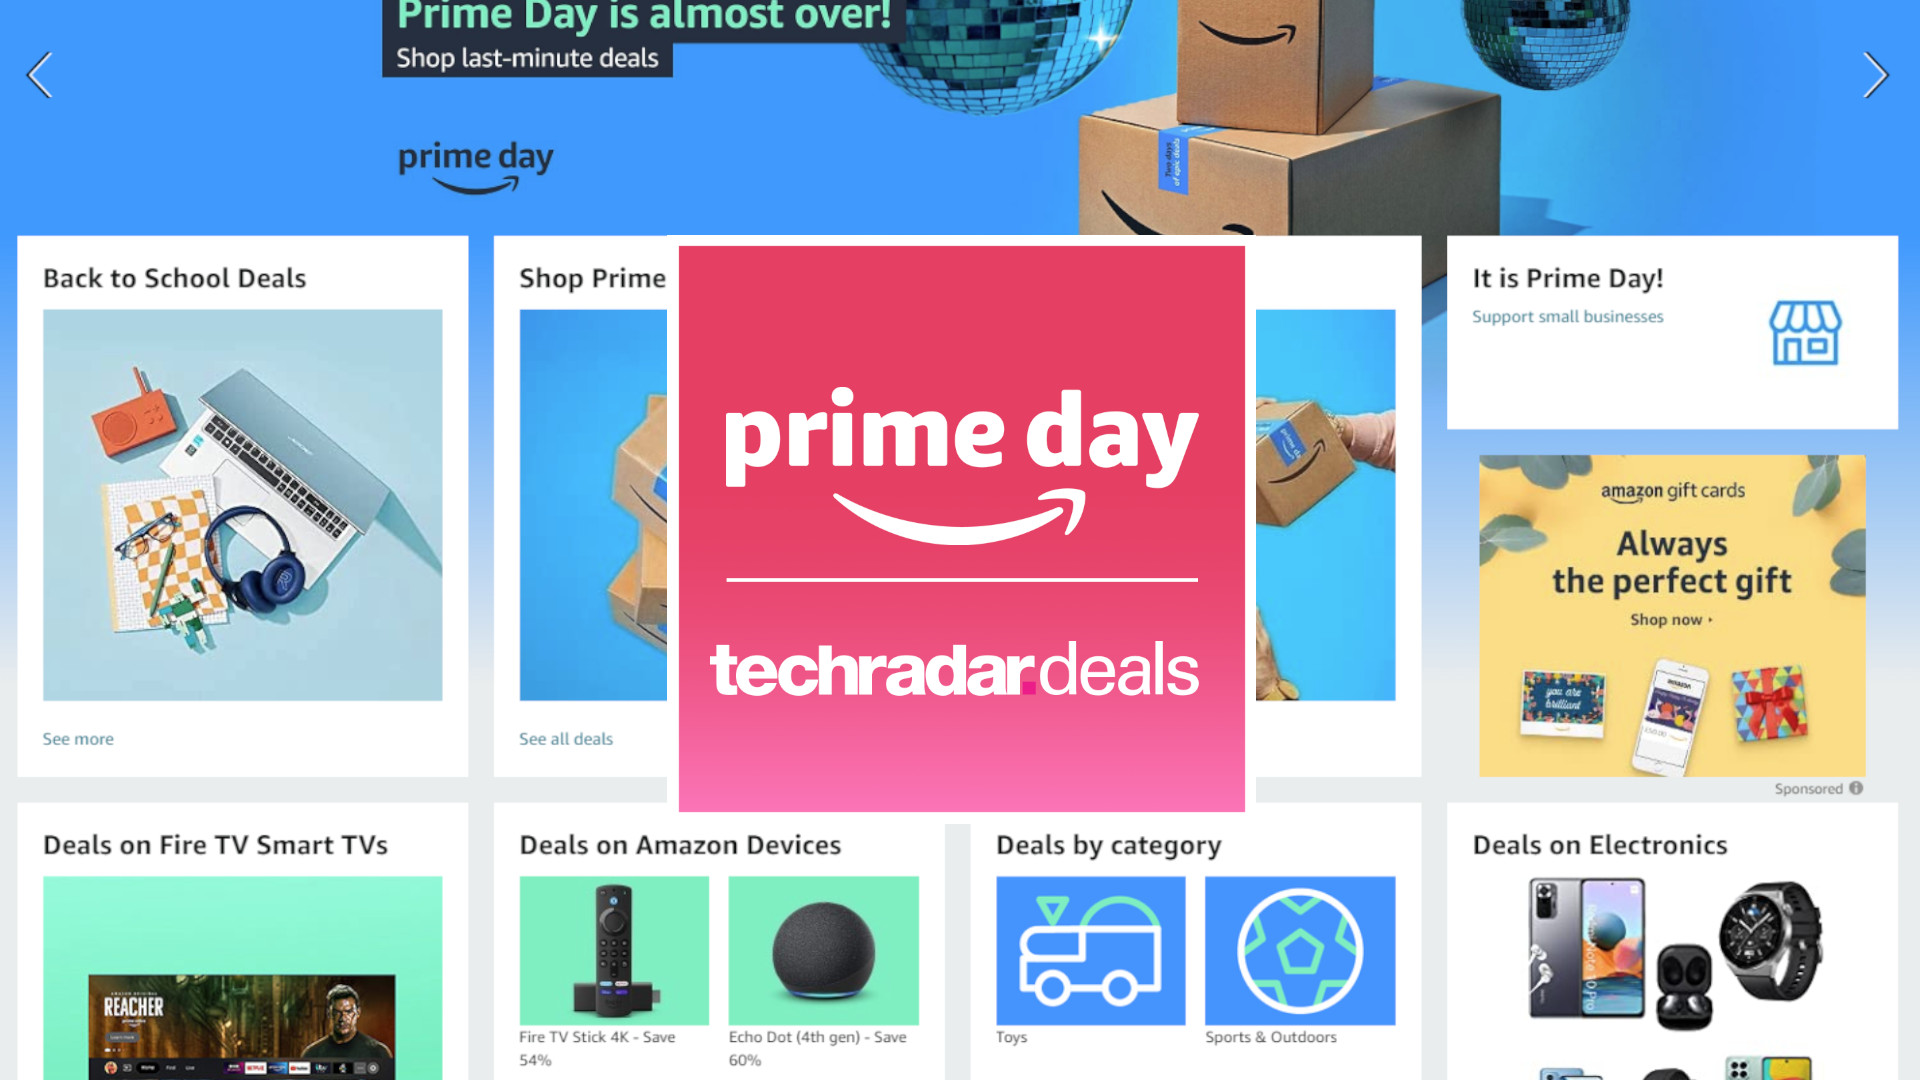 50 of the best Prime Day deals in the UK for day two as picked by our